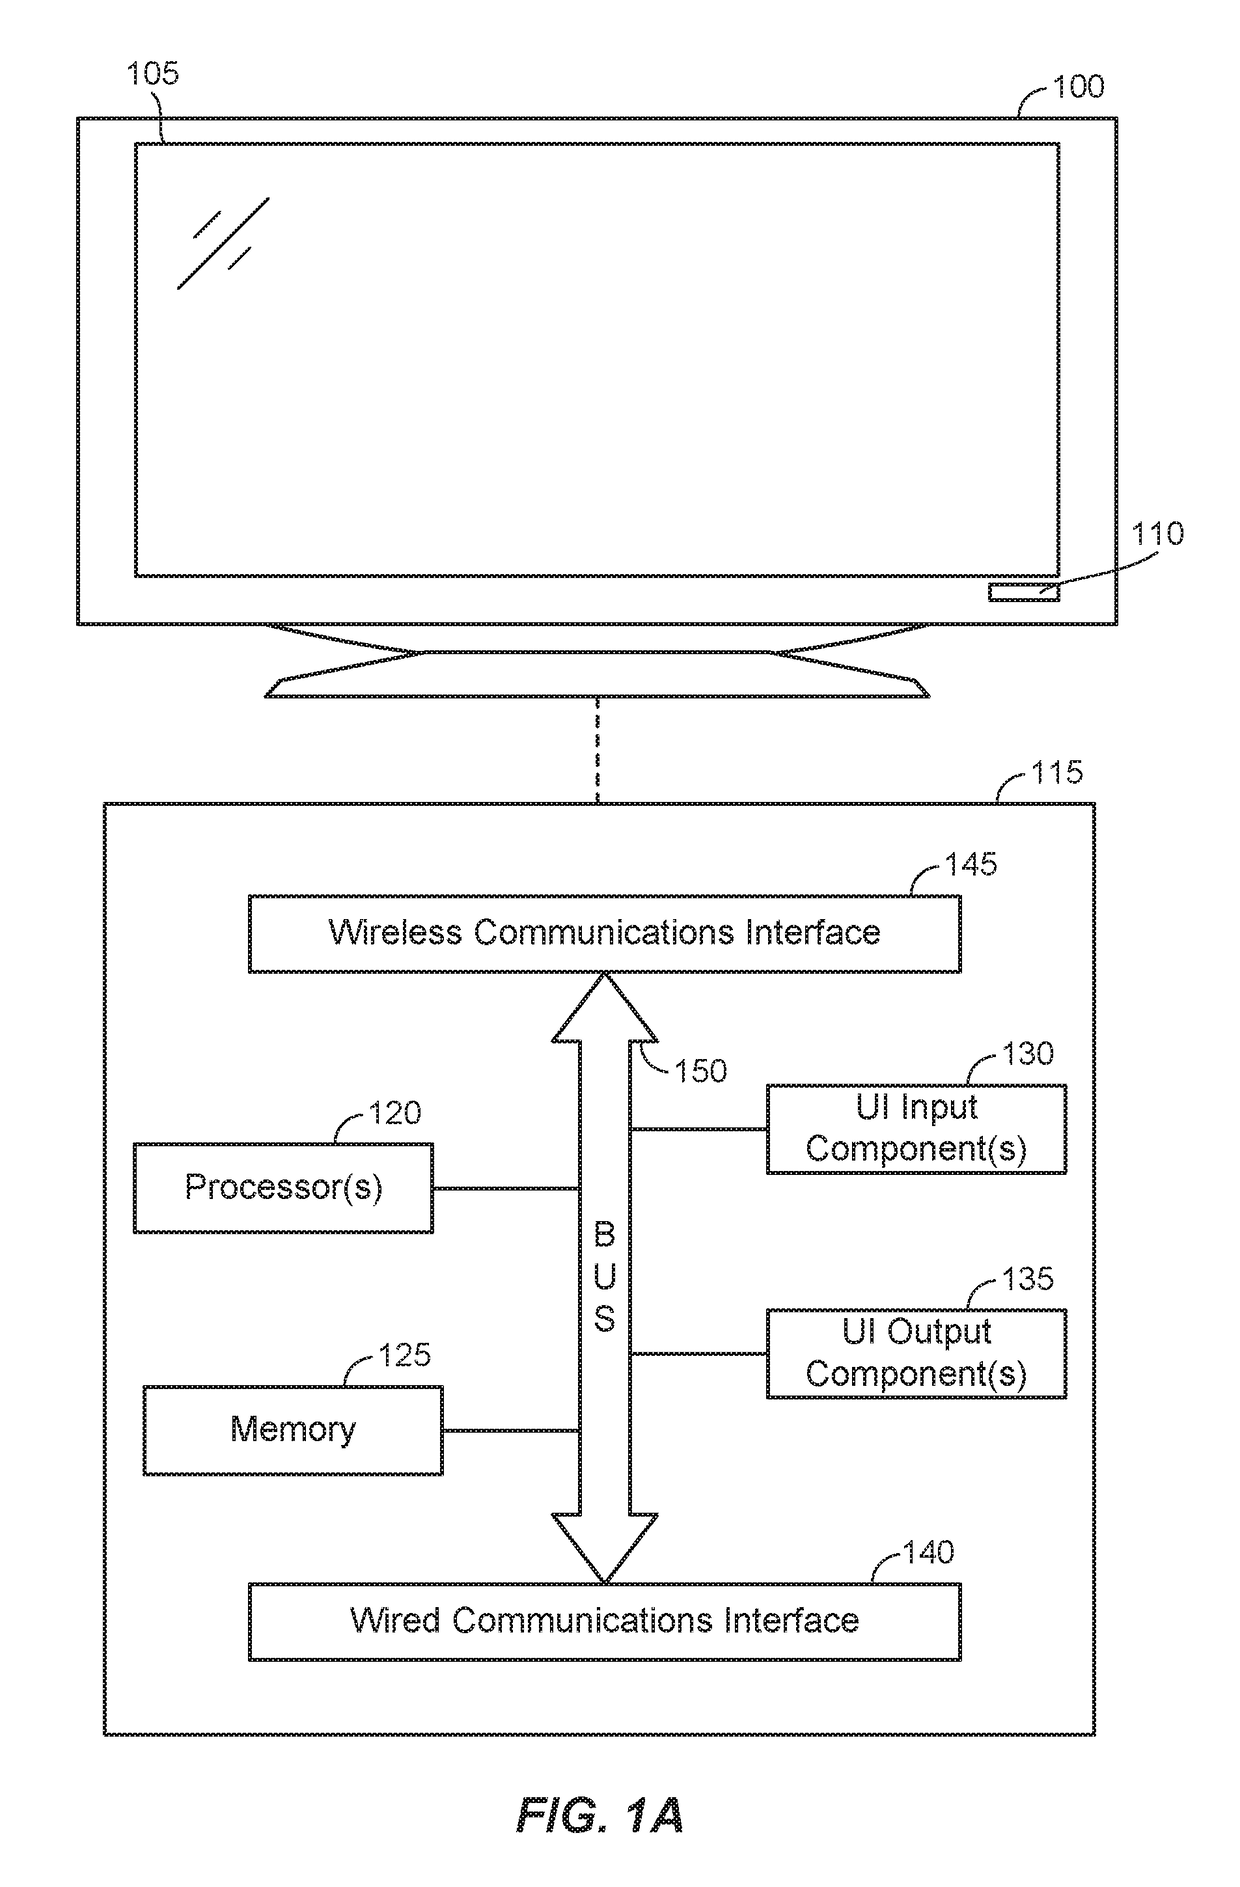 Sharing data between a plurality of source devices that are each connected to a sink device